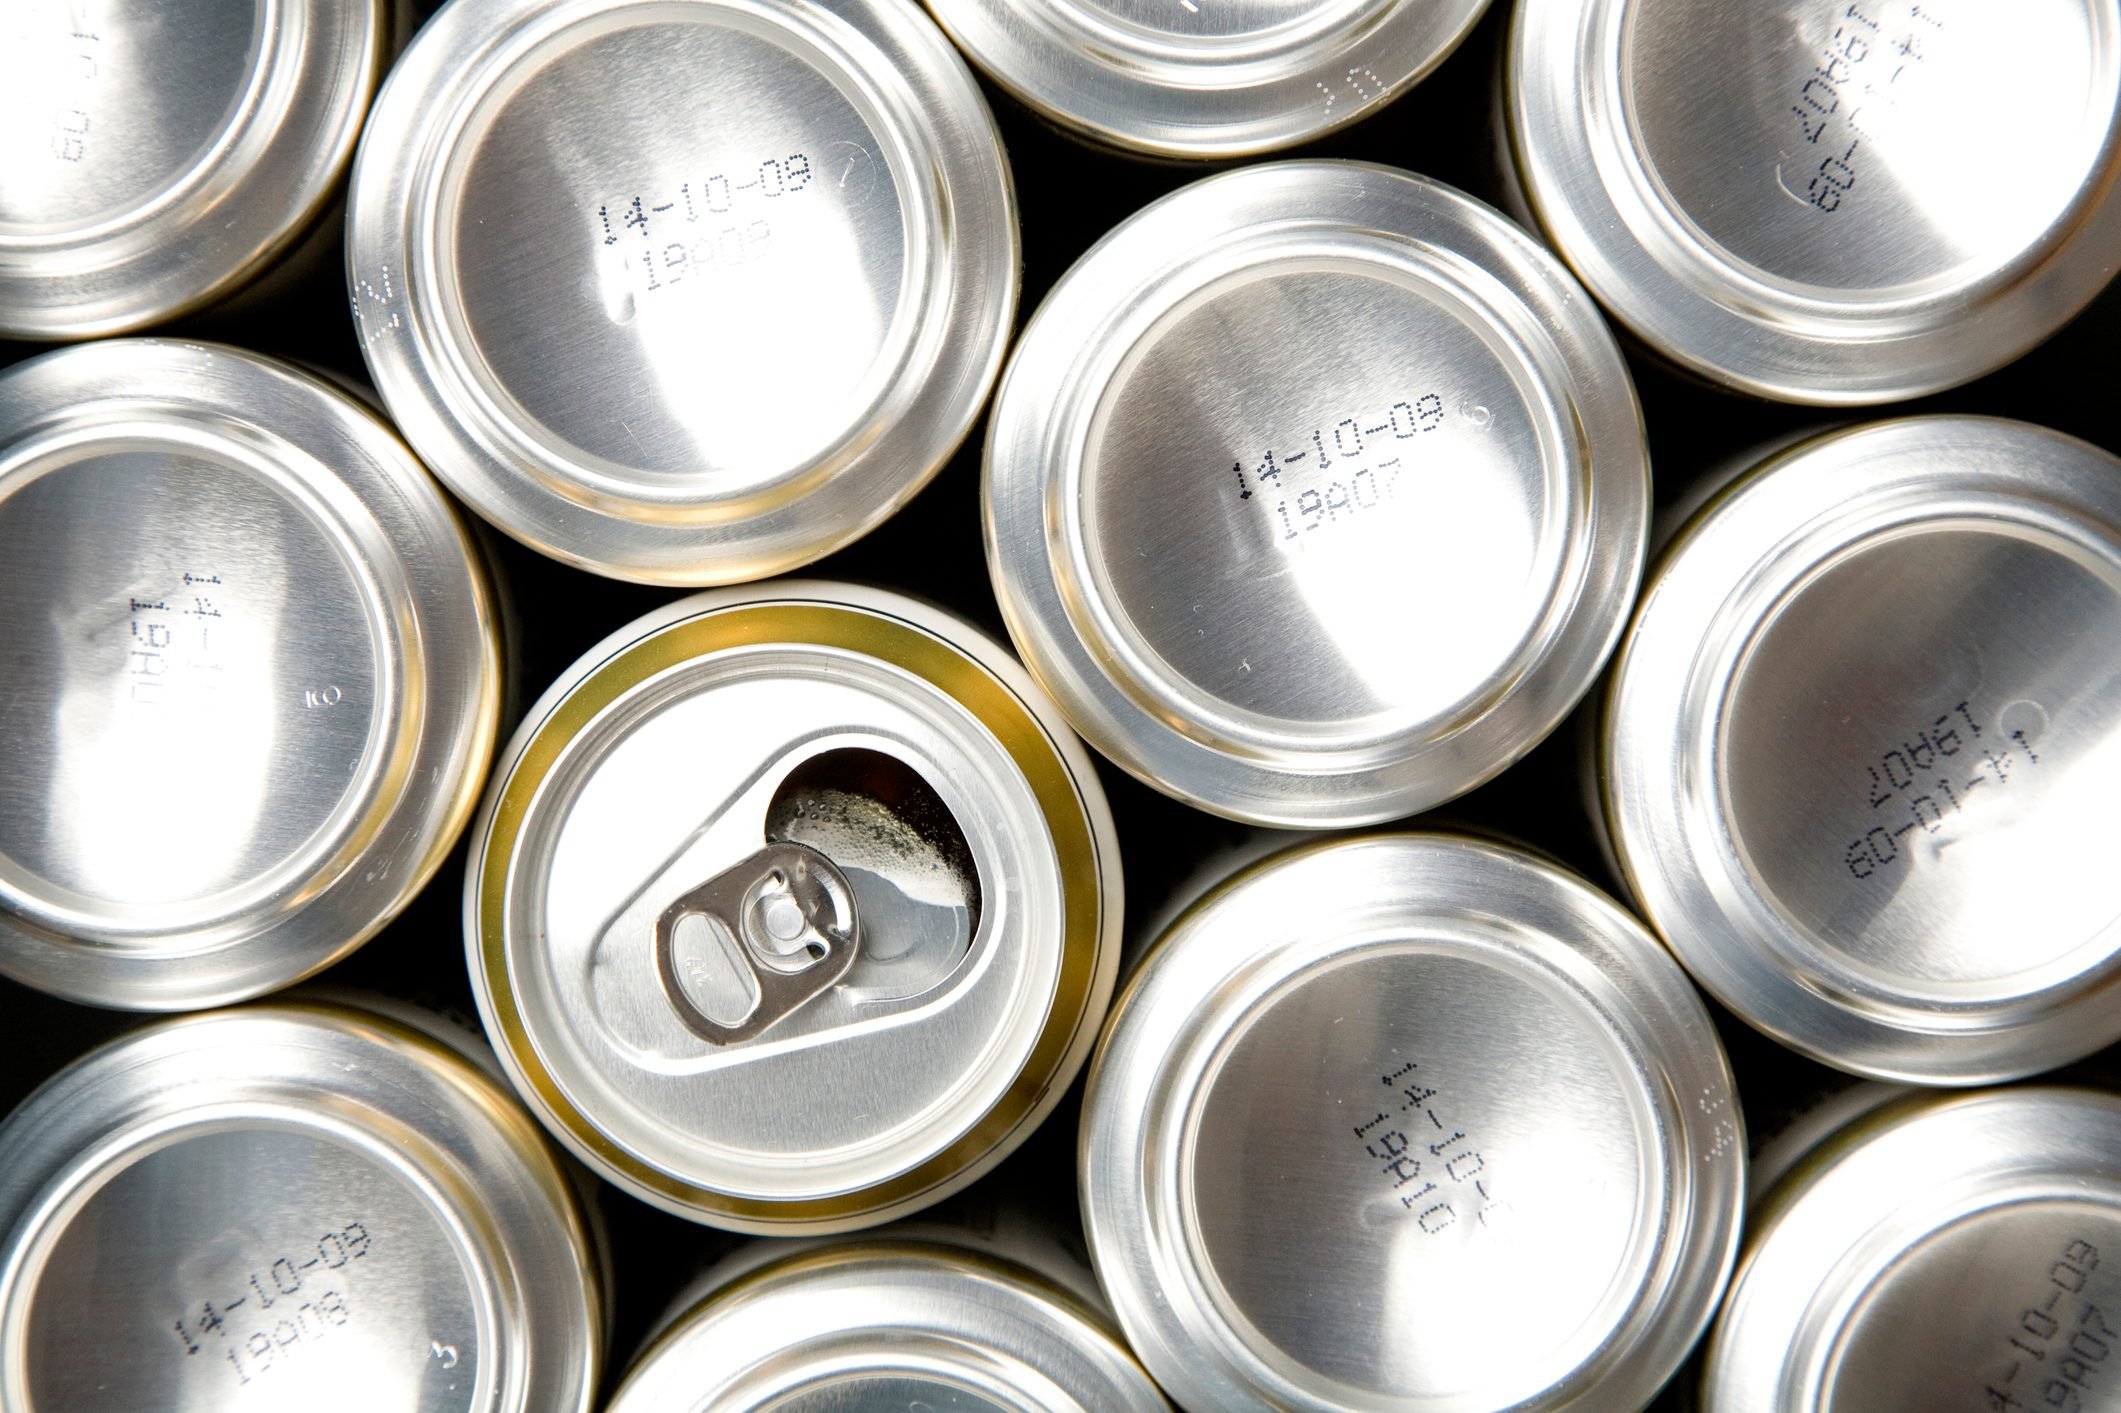 Row of soda cans with one opened can